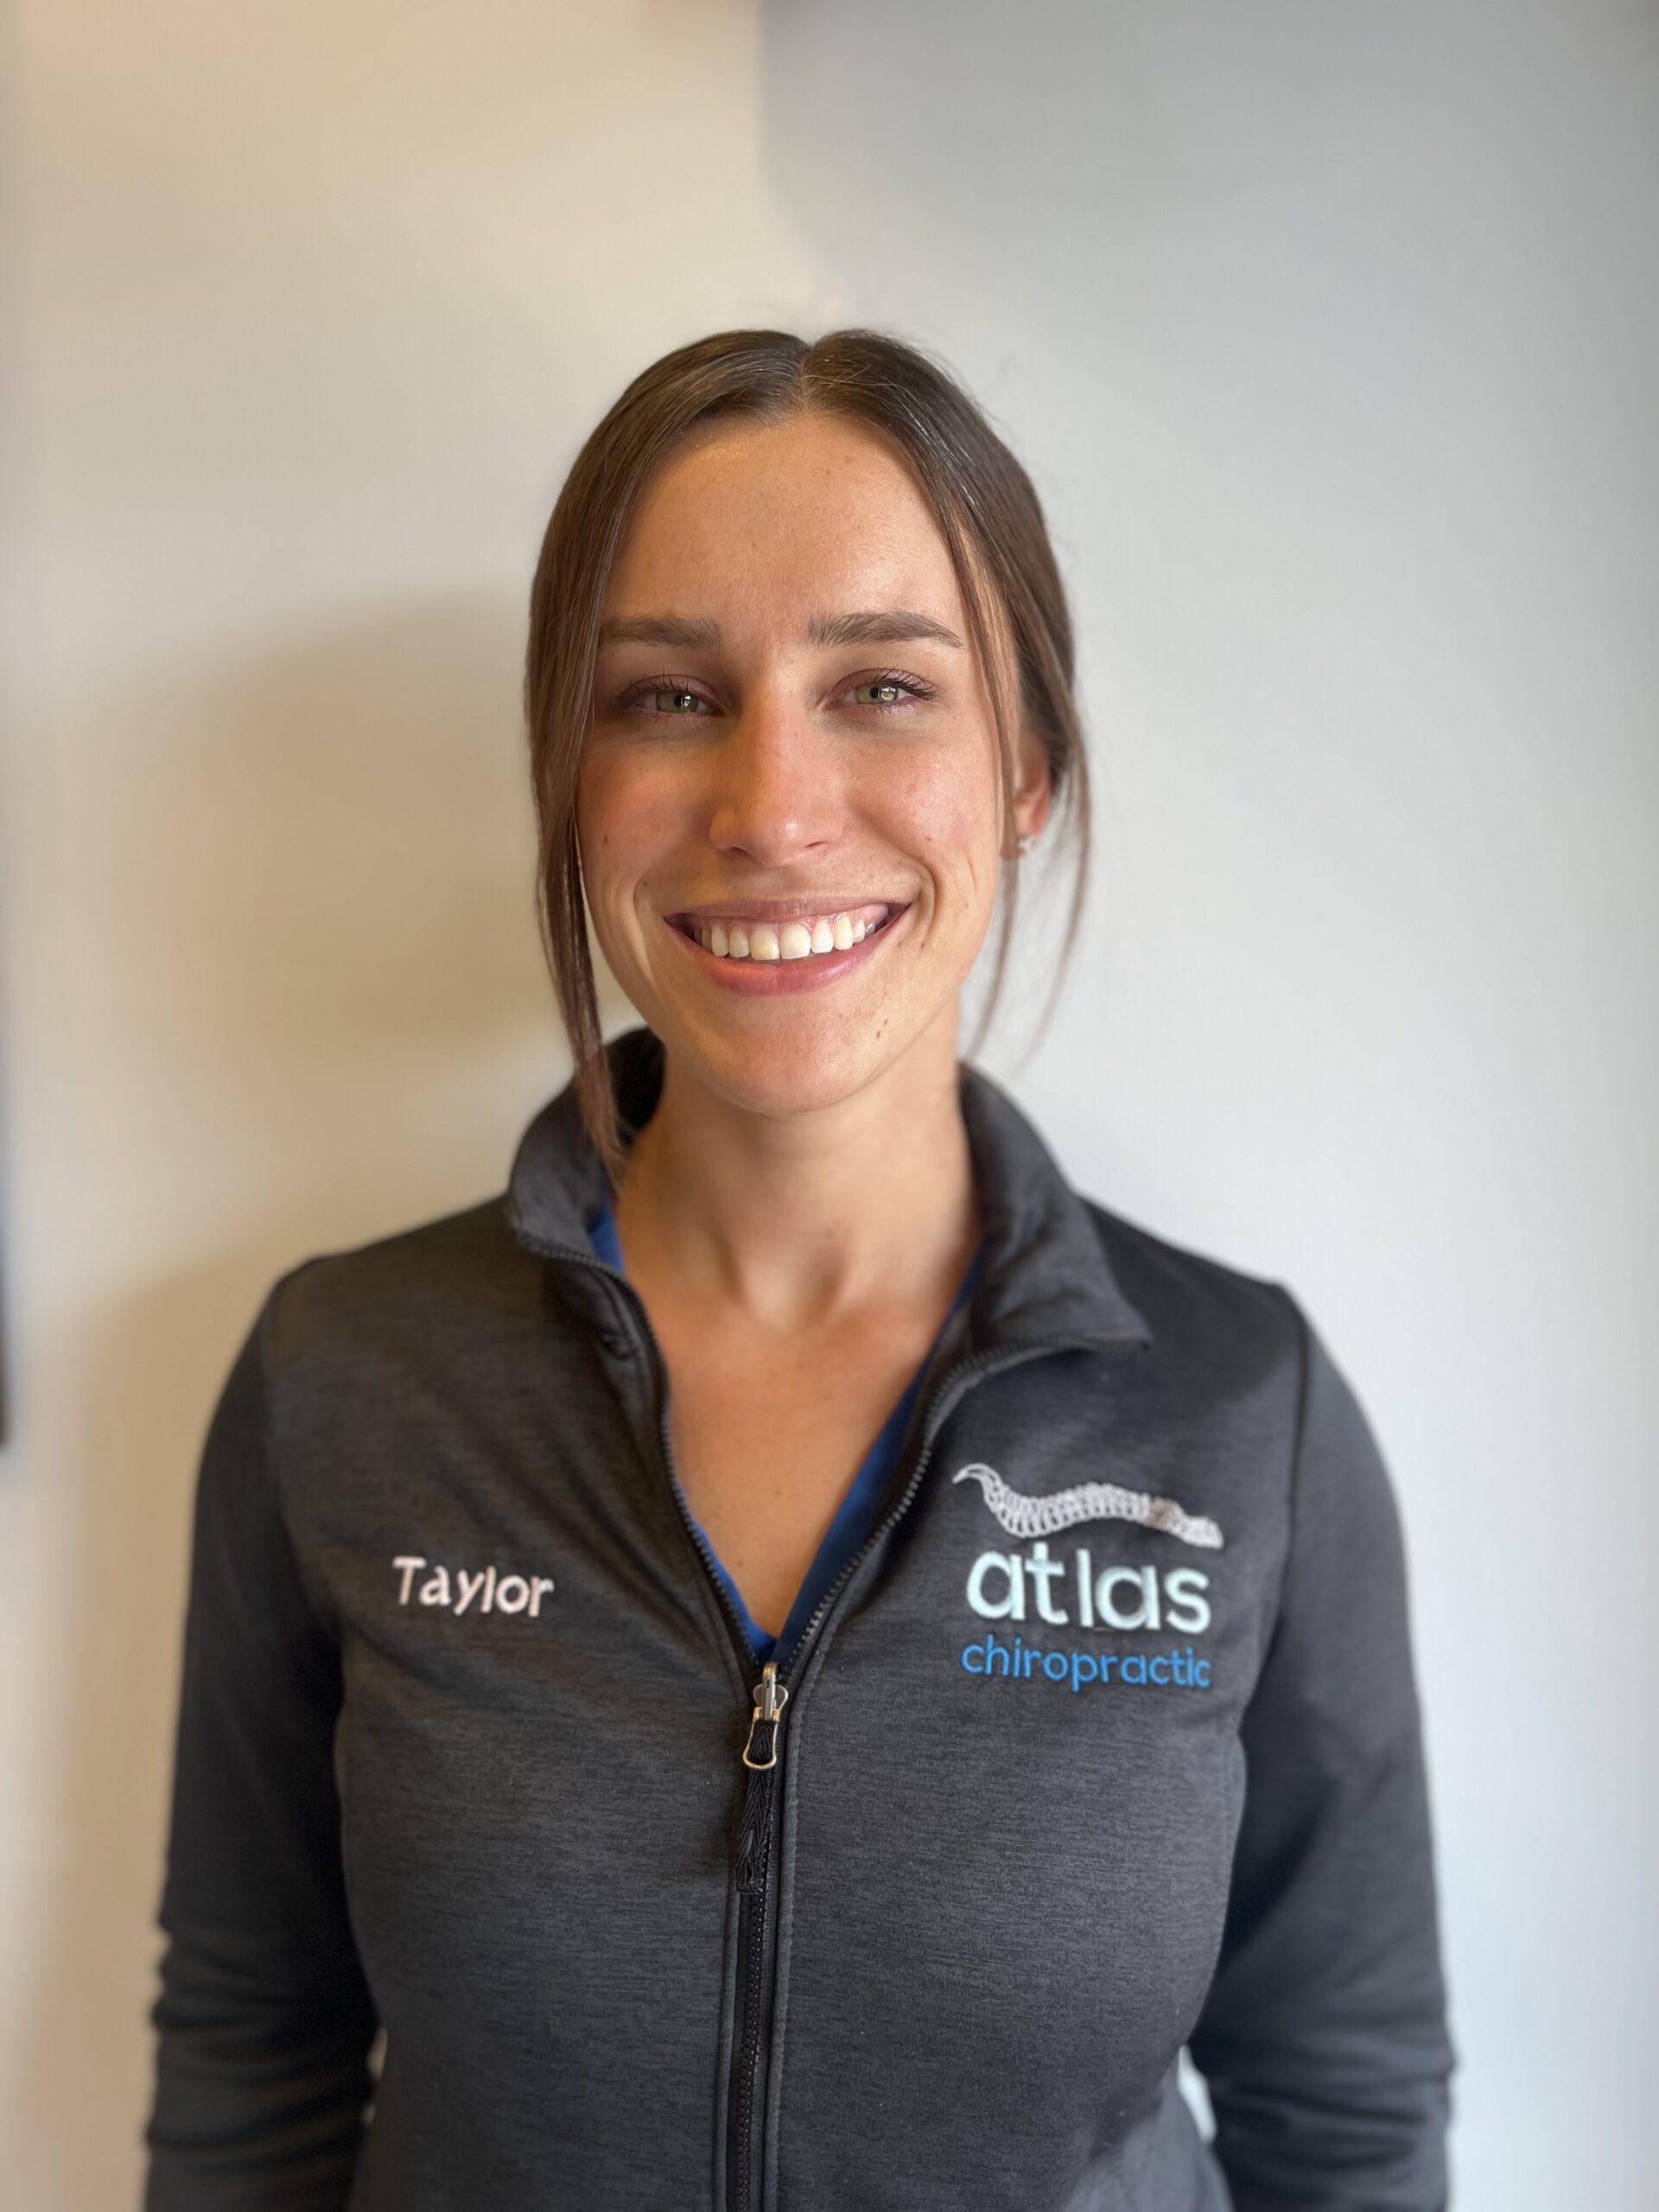 Meet Taylor at Atlas Chiropractic in Fishers IN